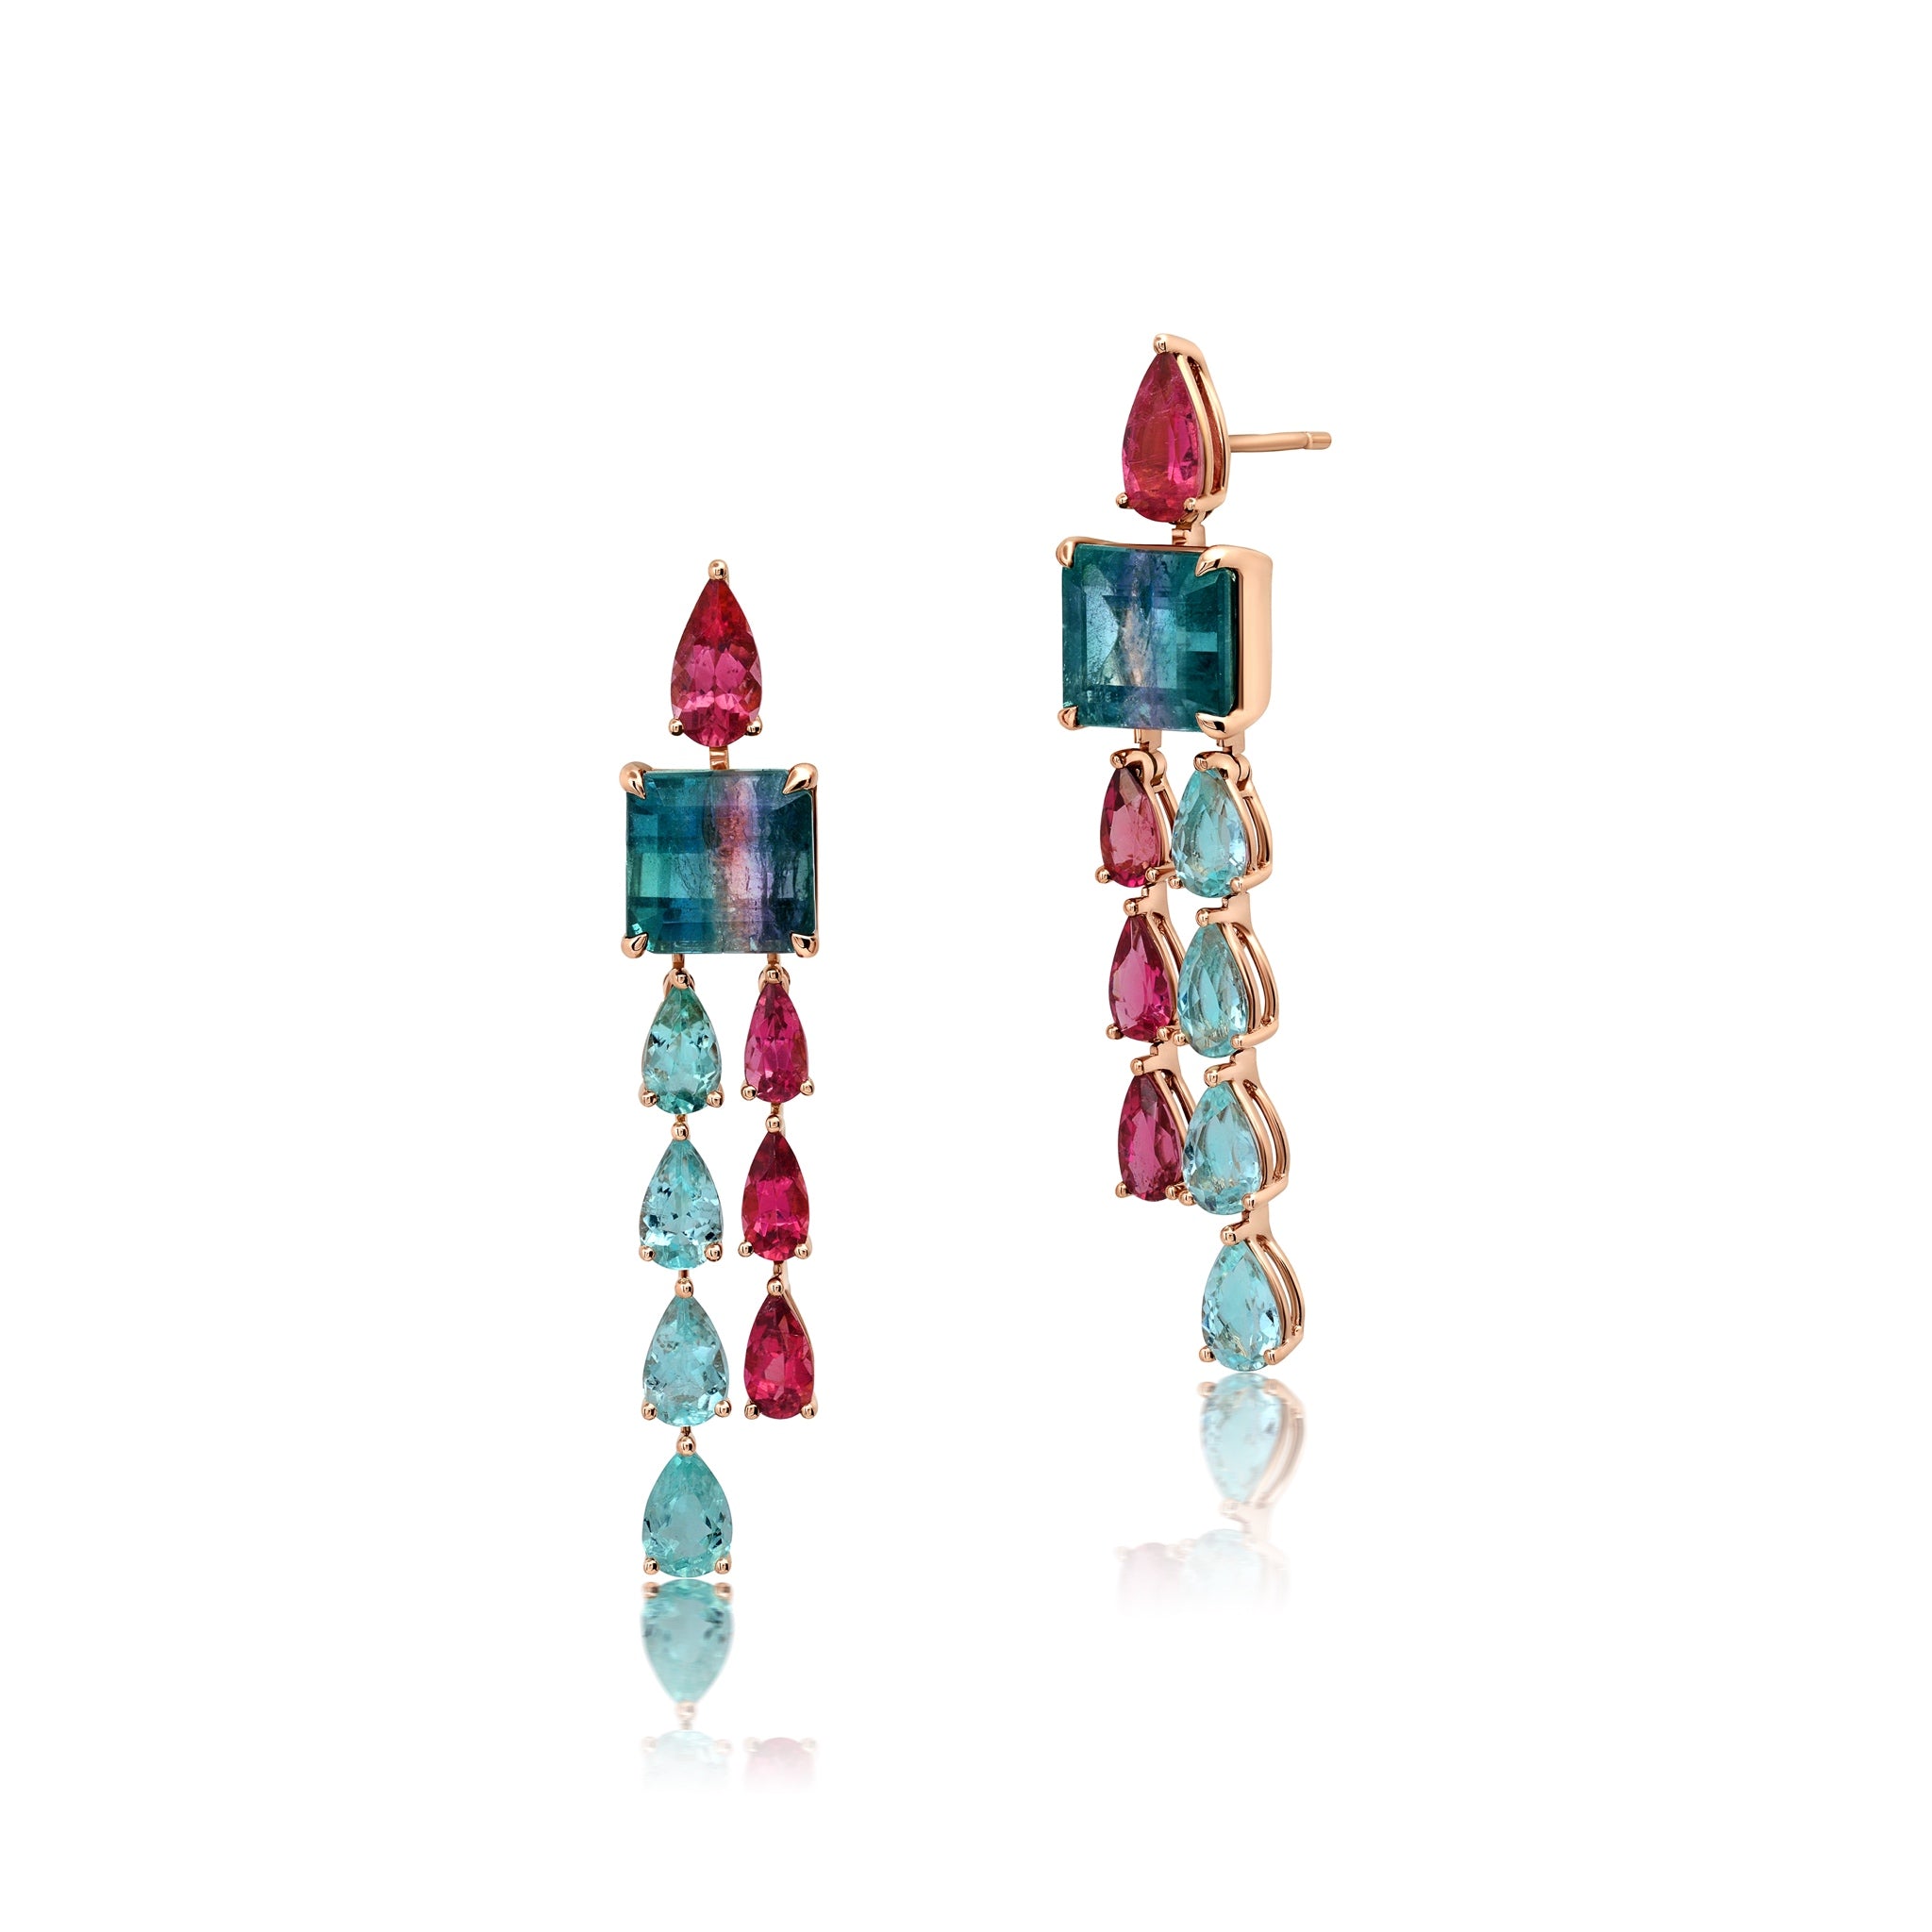 Neon Blue Paraiba Tourmaline Oval Stud Earrings – The Butler Collection